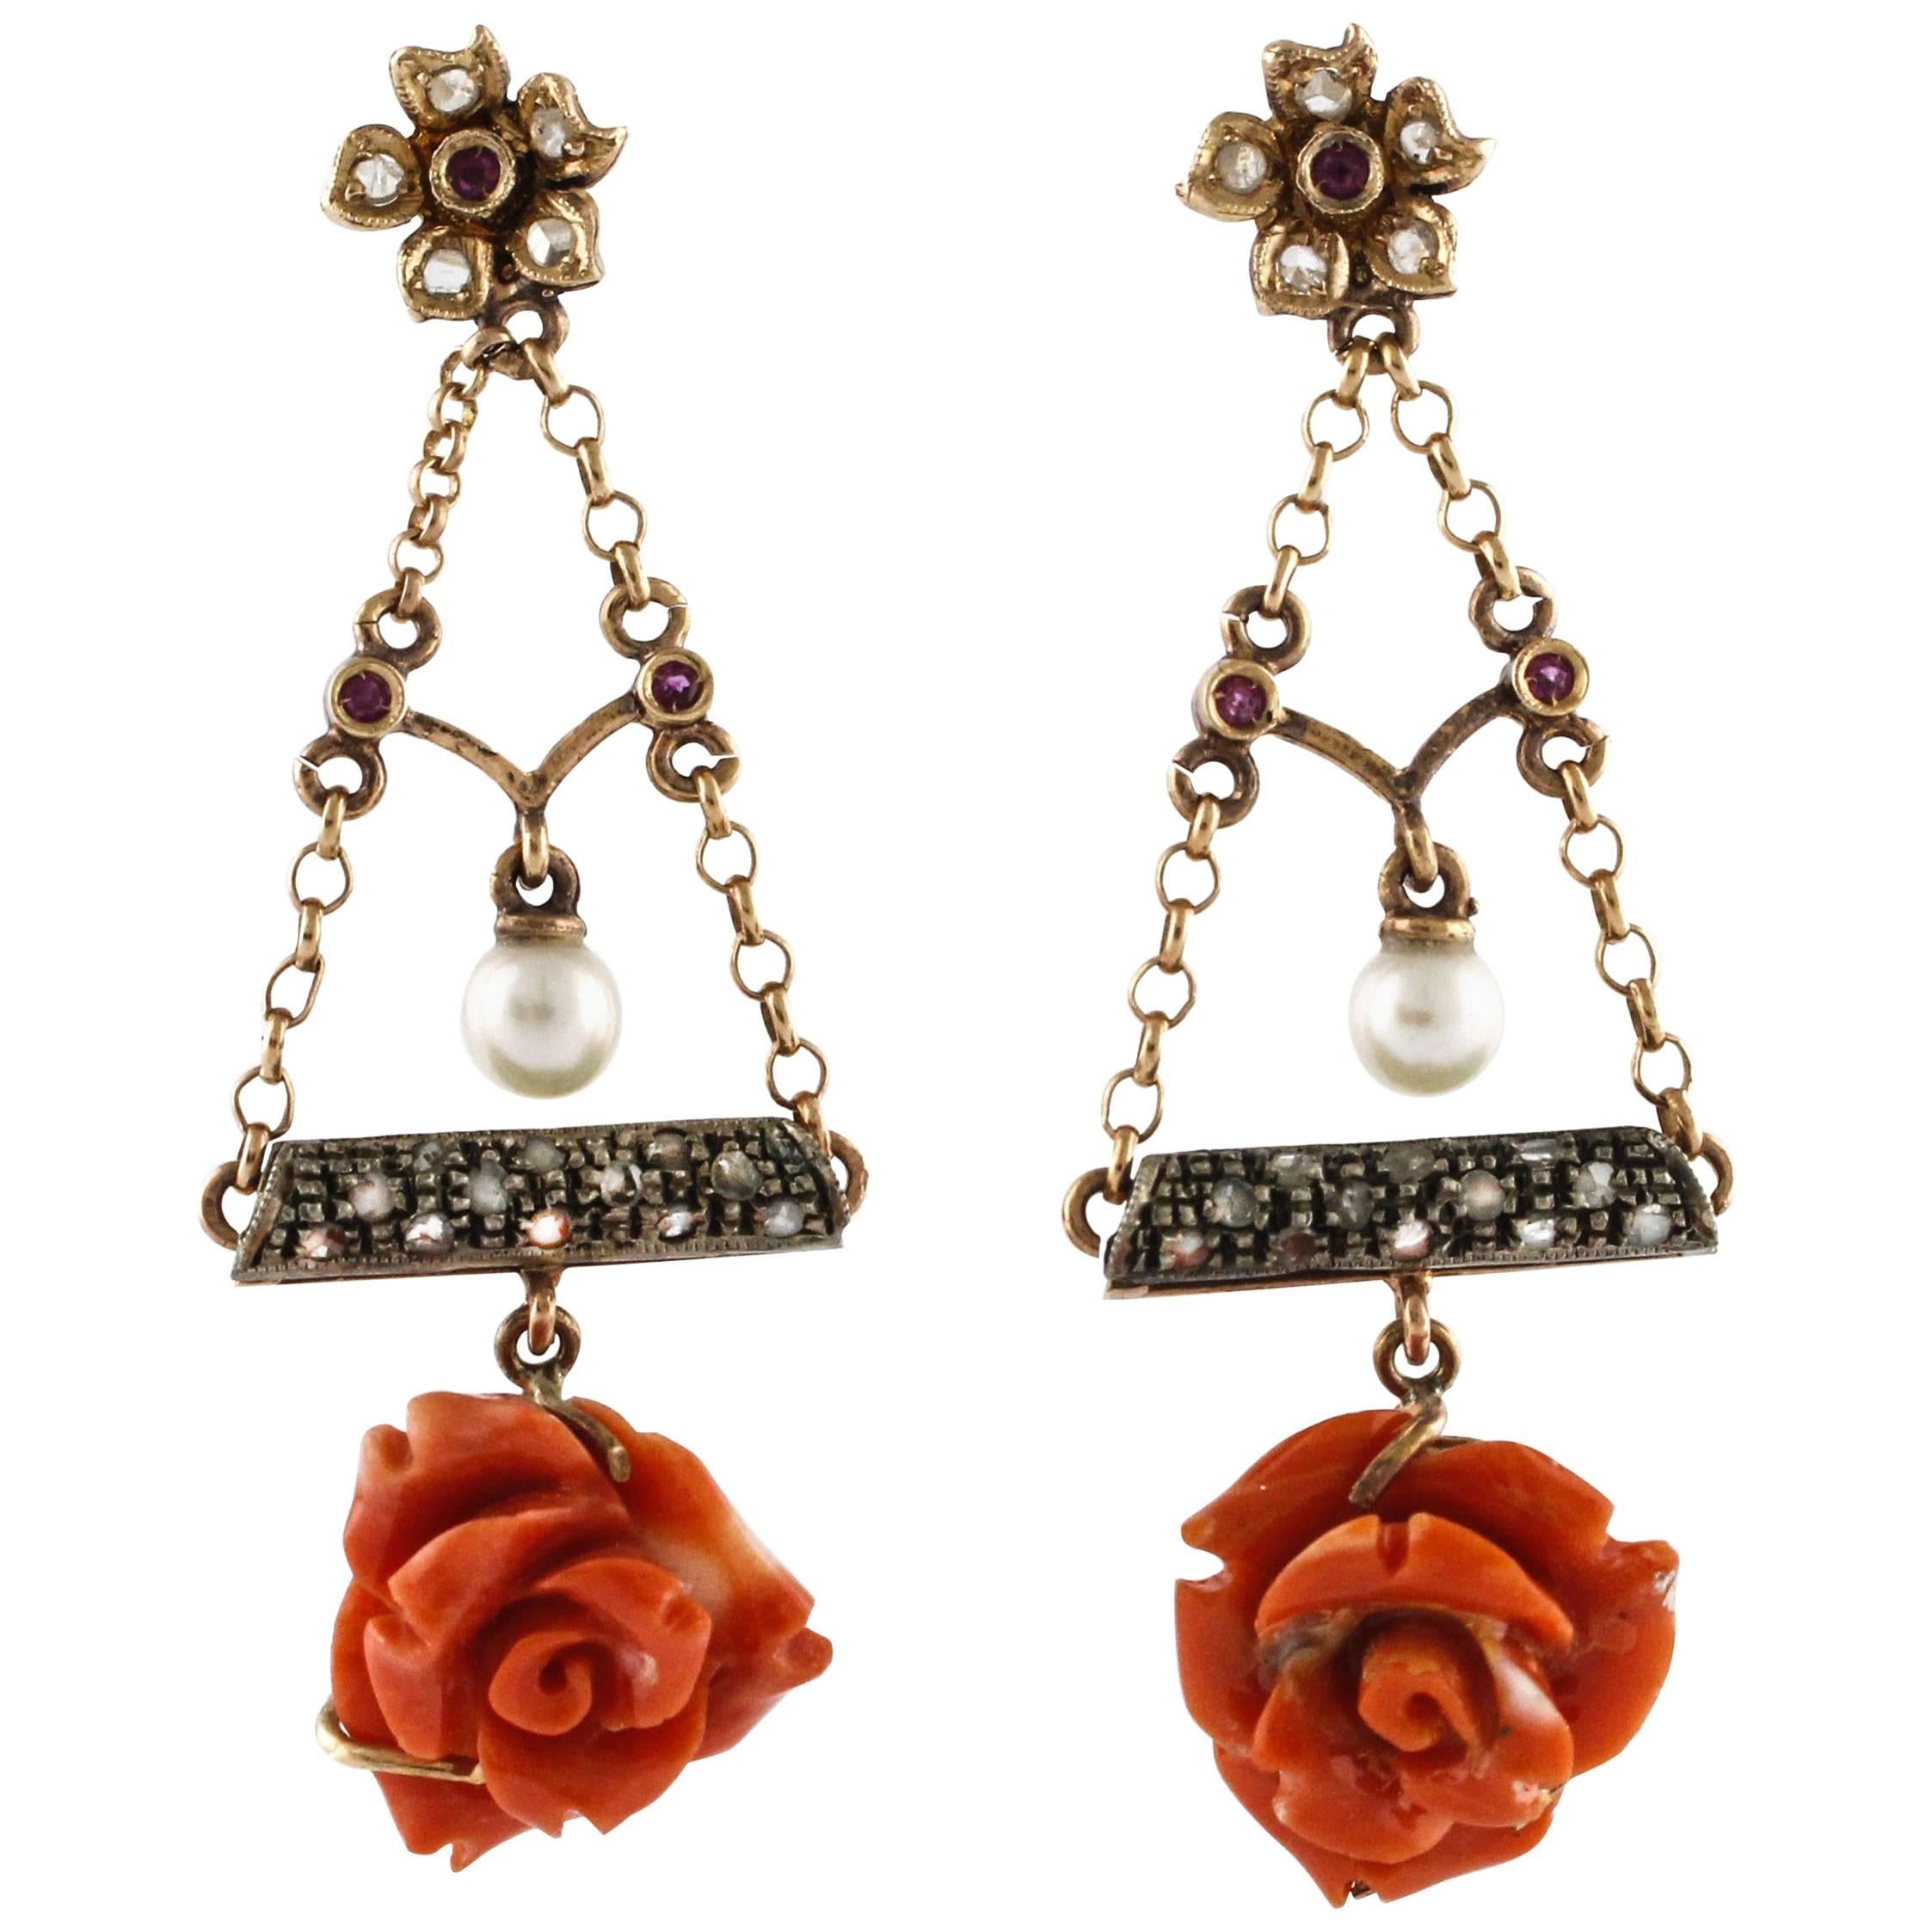 Red Coral Flowers, Diamonds, Pearls, Rubies, Rose Gold and Silver Flower Earrings